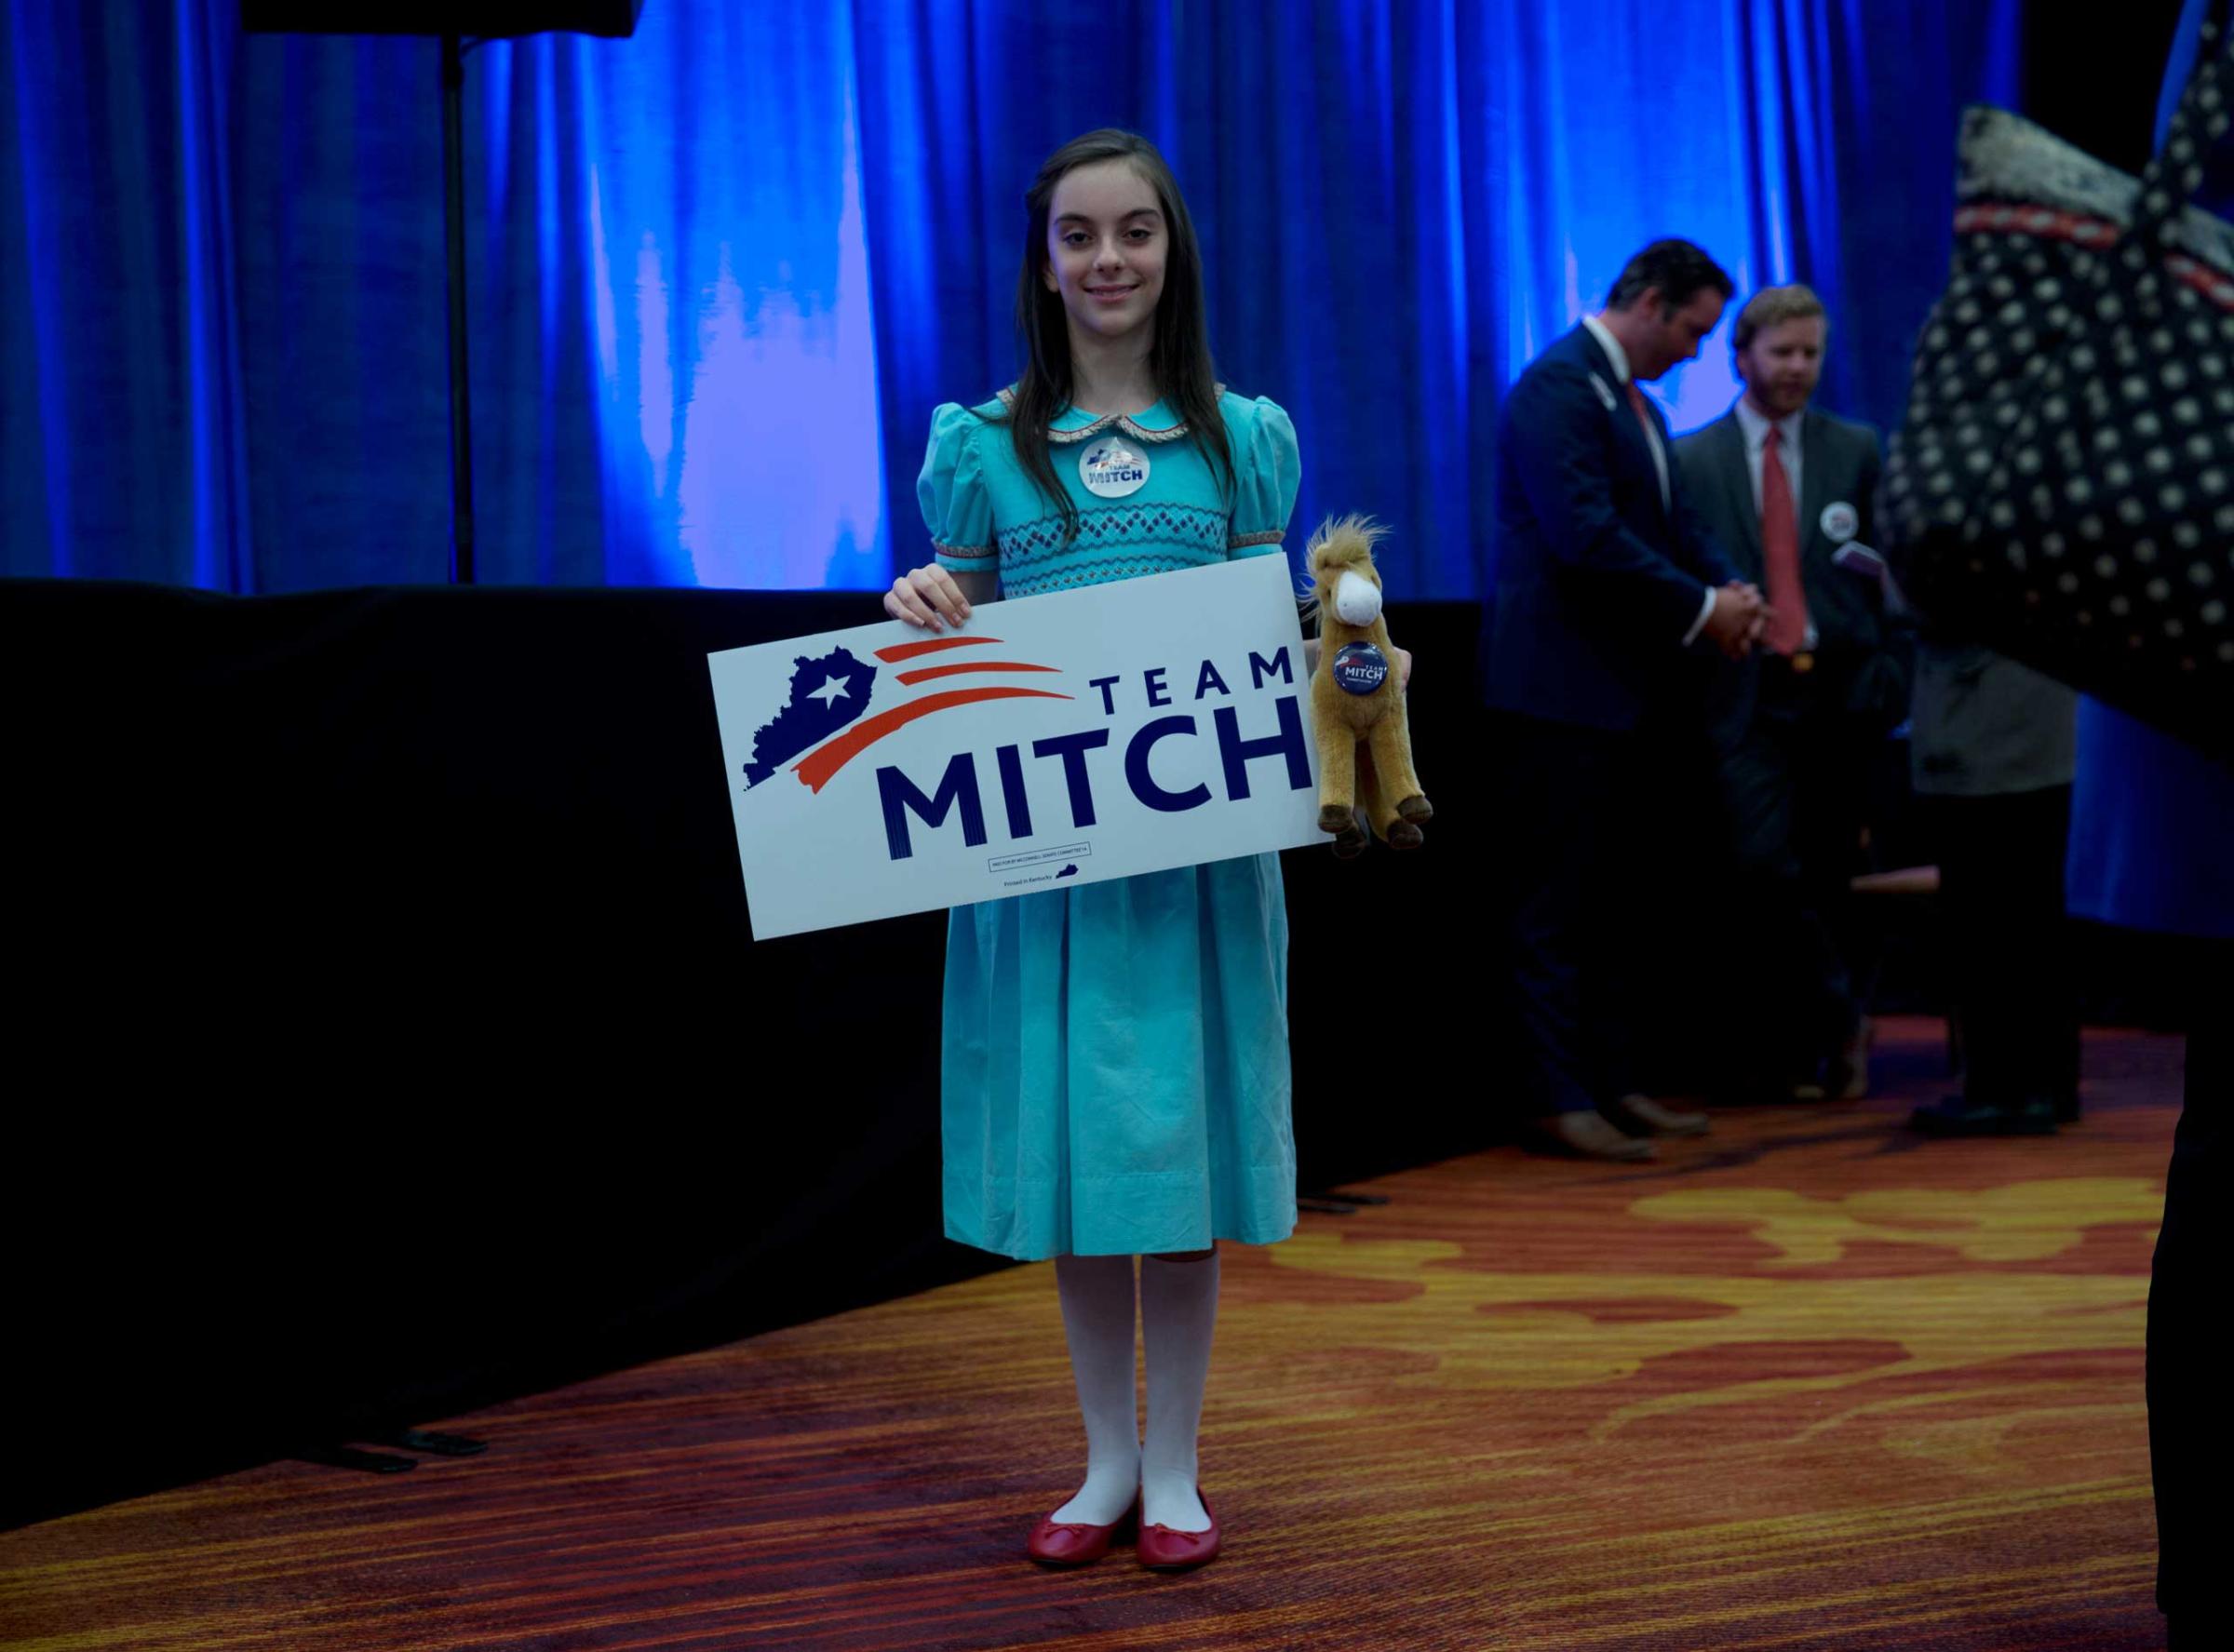 A supporter of incumbent Sen. Mitch McConnell's win at the Louisville Marriott East Hotel in Louisville, Ky. on Nov. 4, 2014.